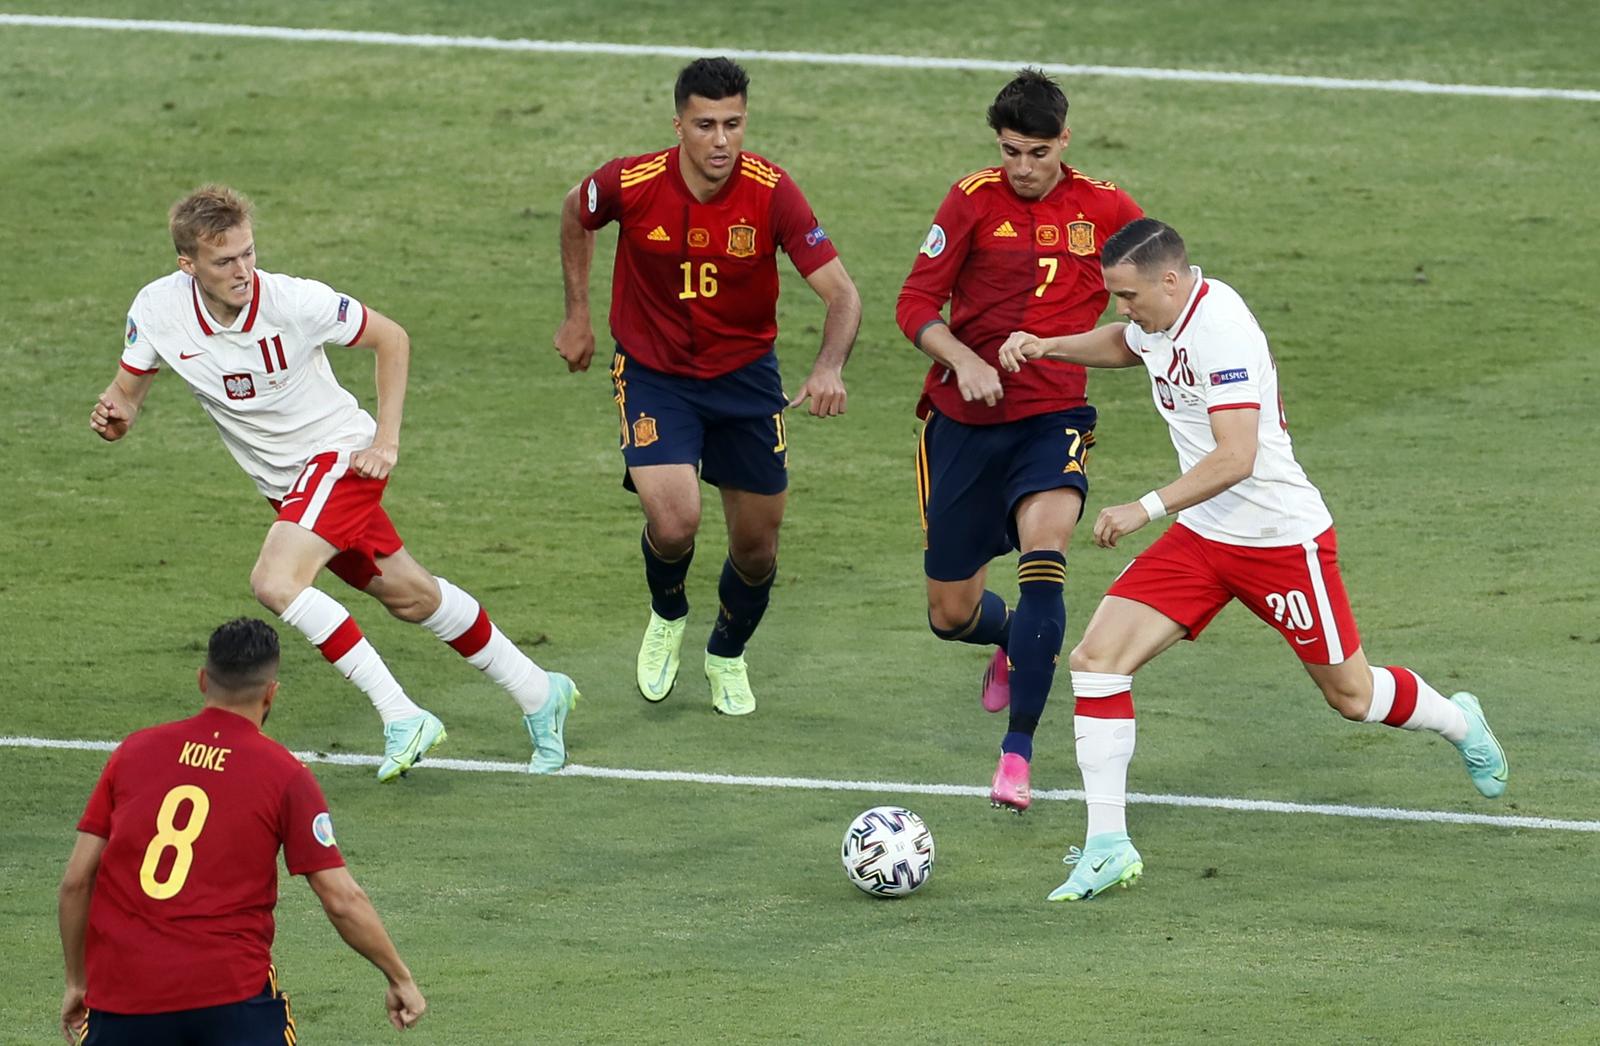 Wasteful Spain held by Poland, face crunch final group game